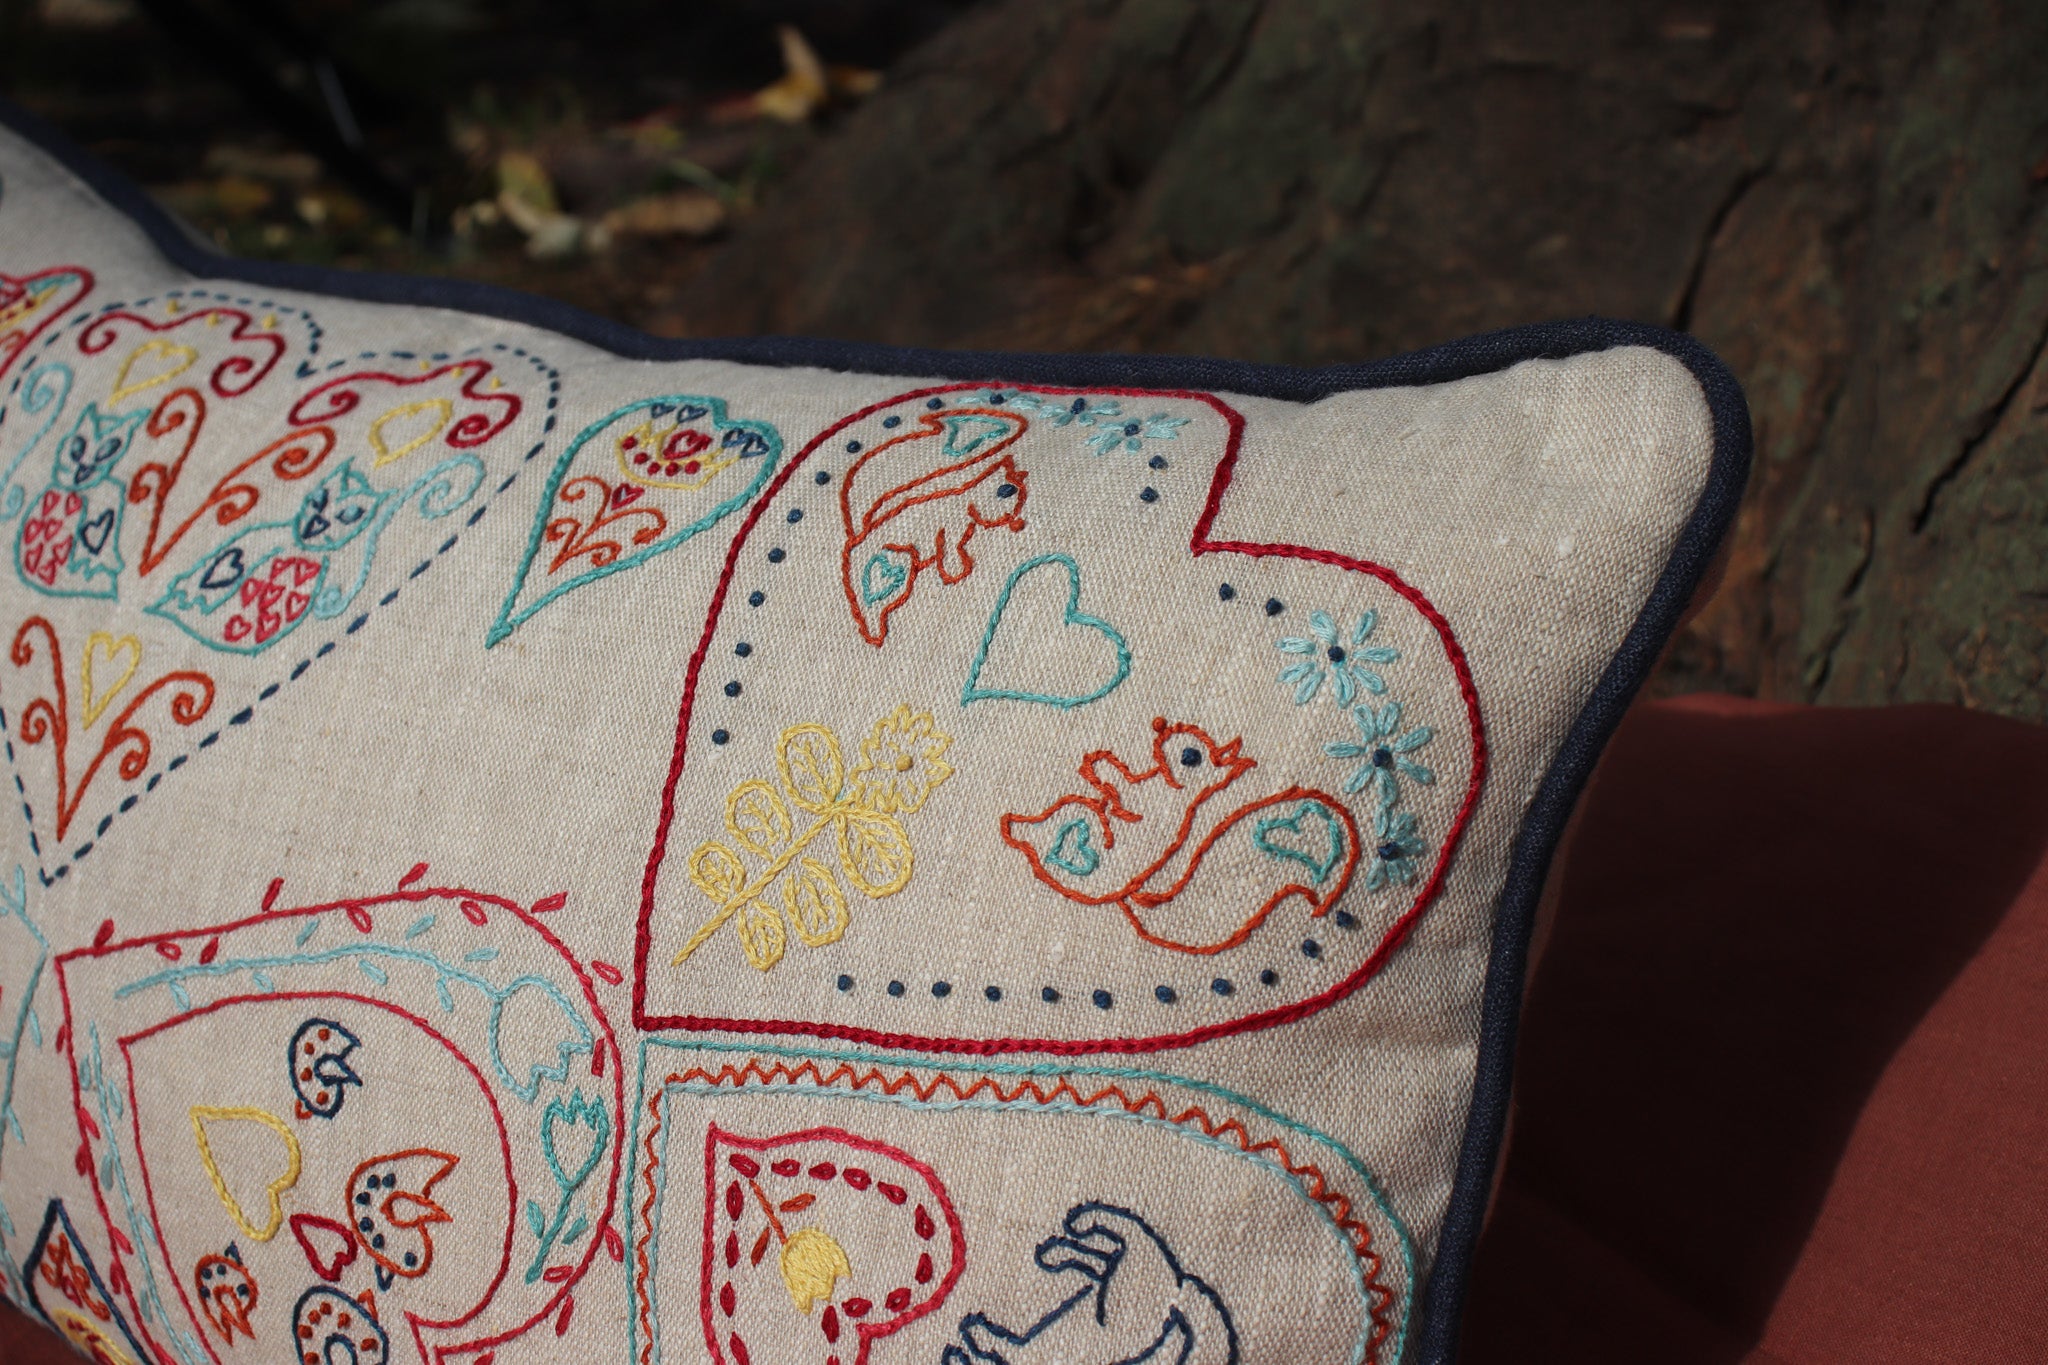 Embroidered cushions